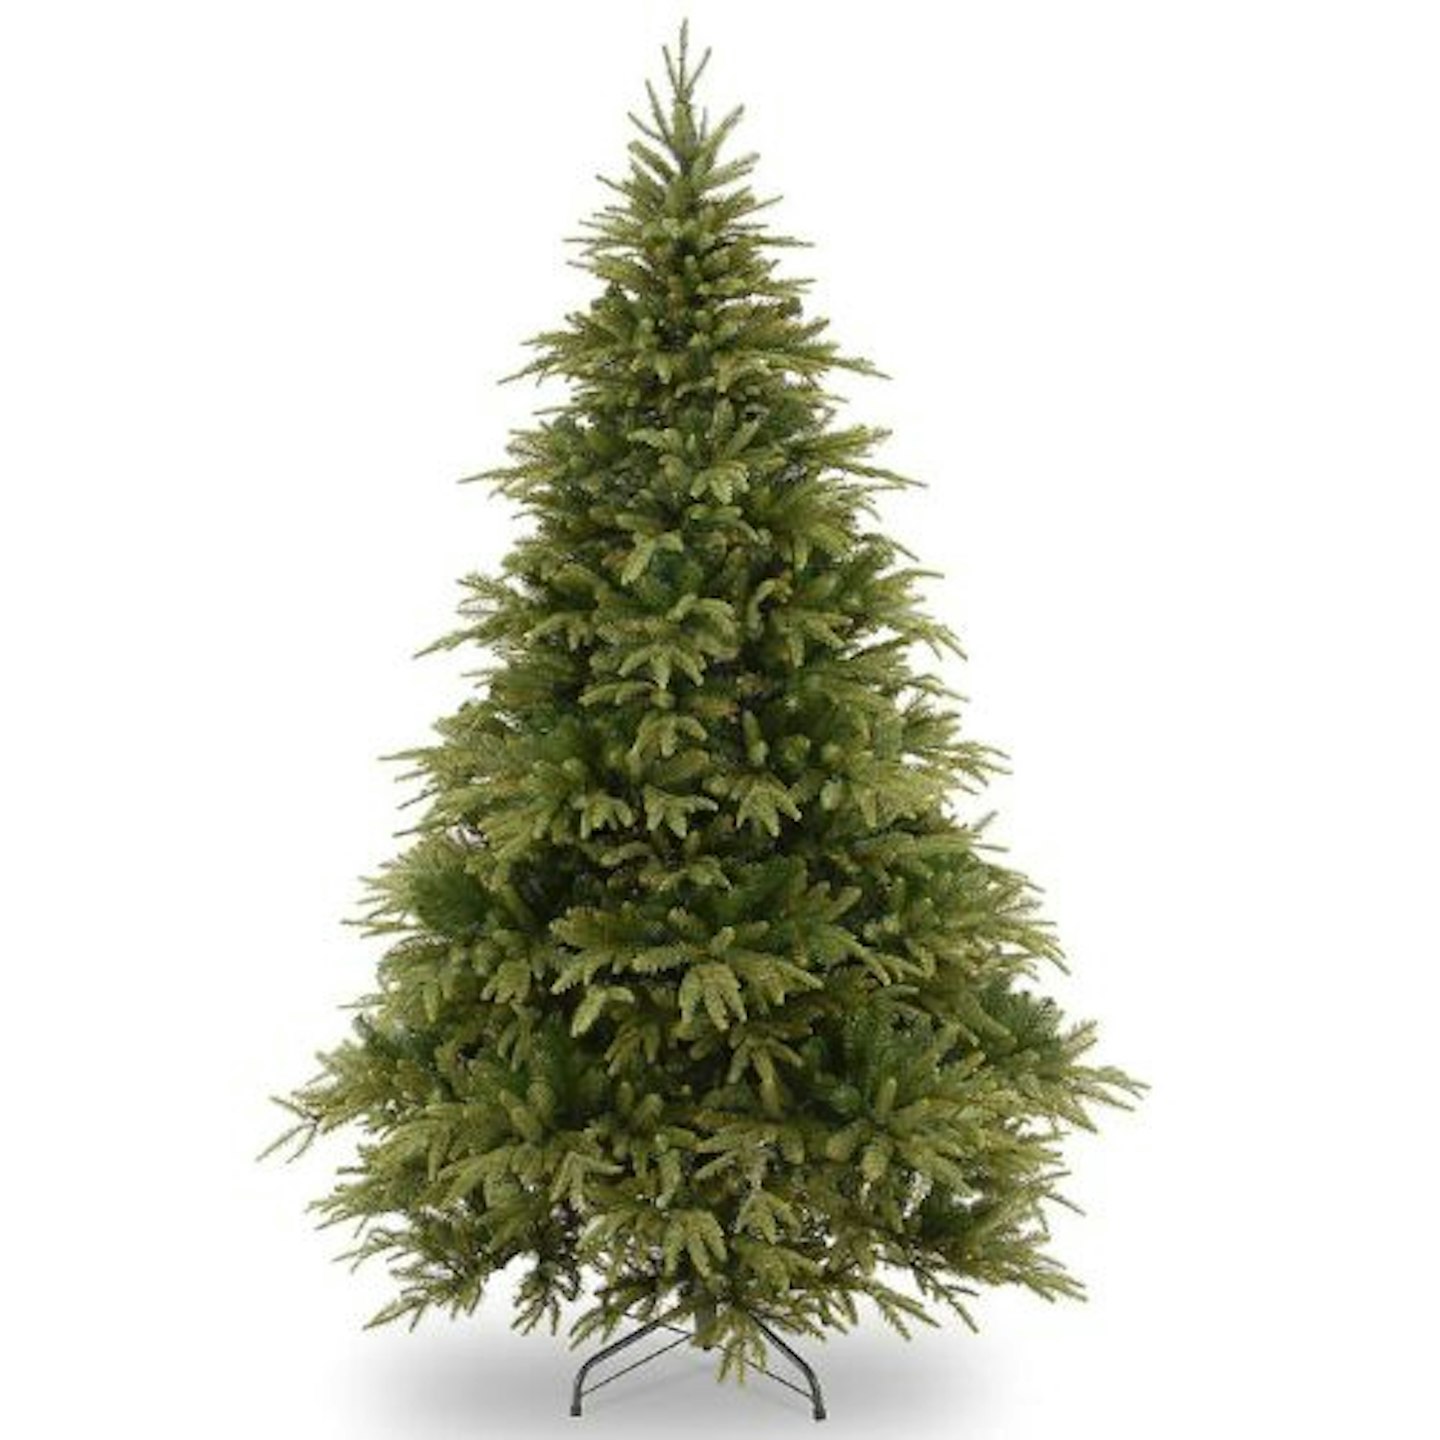 Best artificial Christmas tree 5.5ft Feel Real Weeping Spruce Hinged Christmas Tree